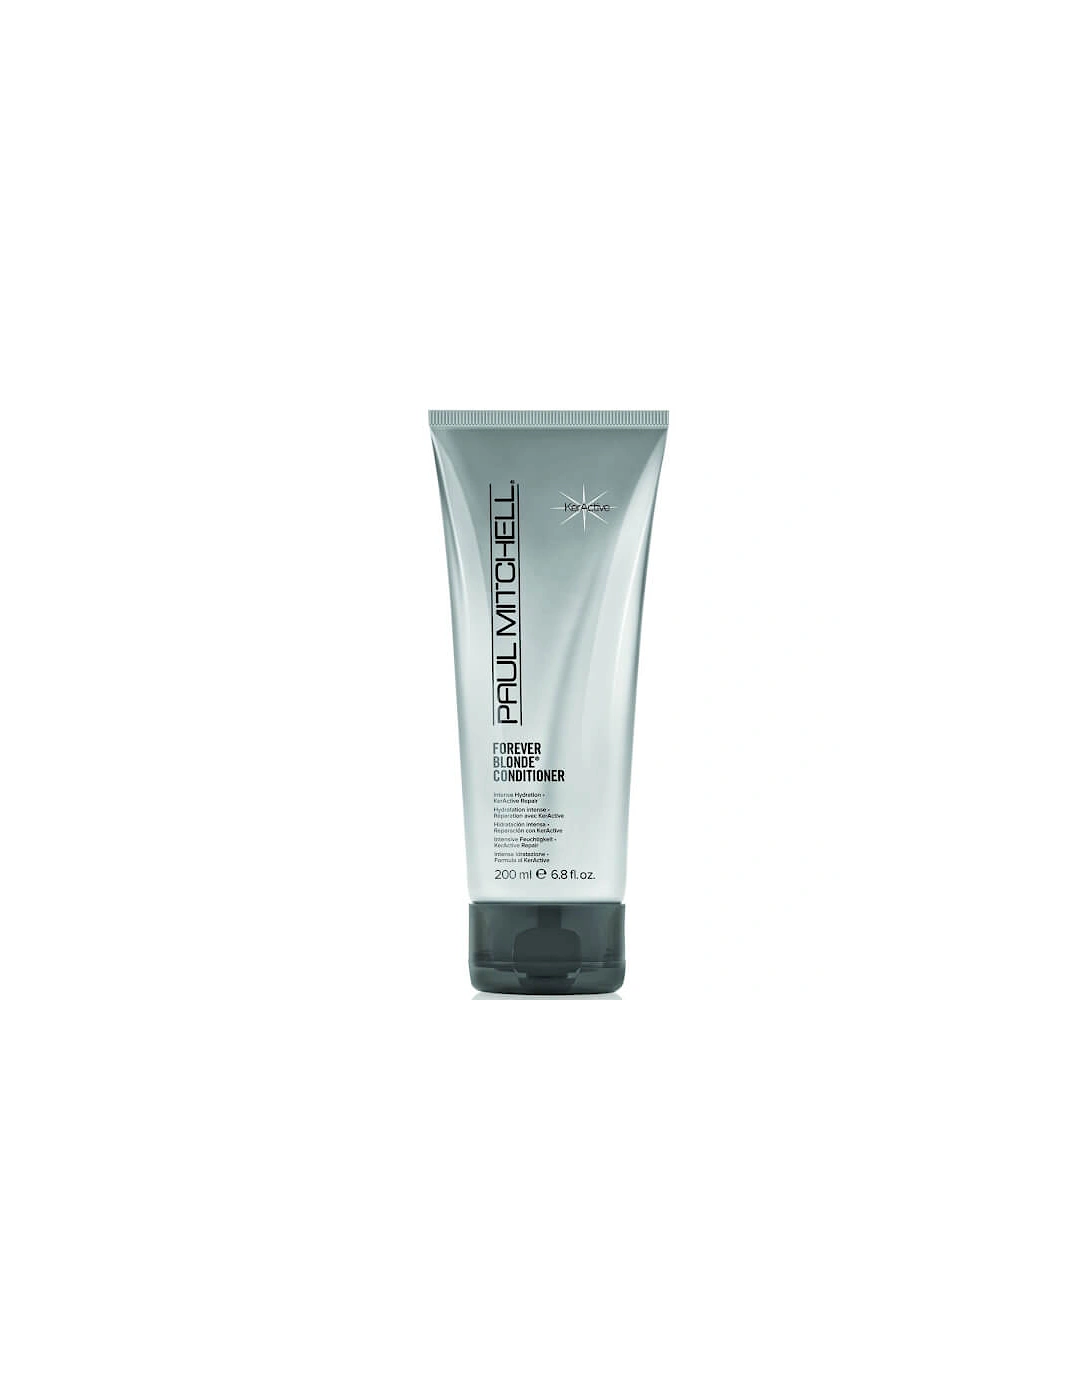 Forever Blonde Conditioner (200ml) - Paul Mitchell, 2 of 1